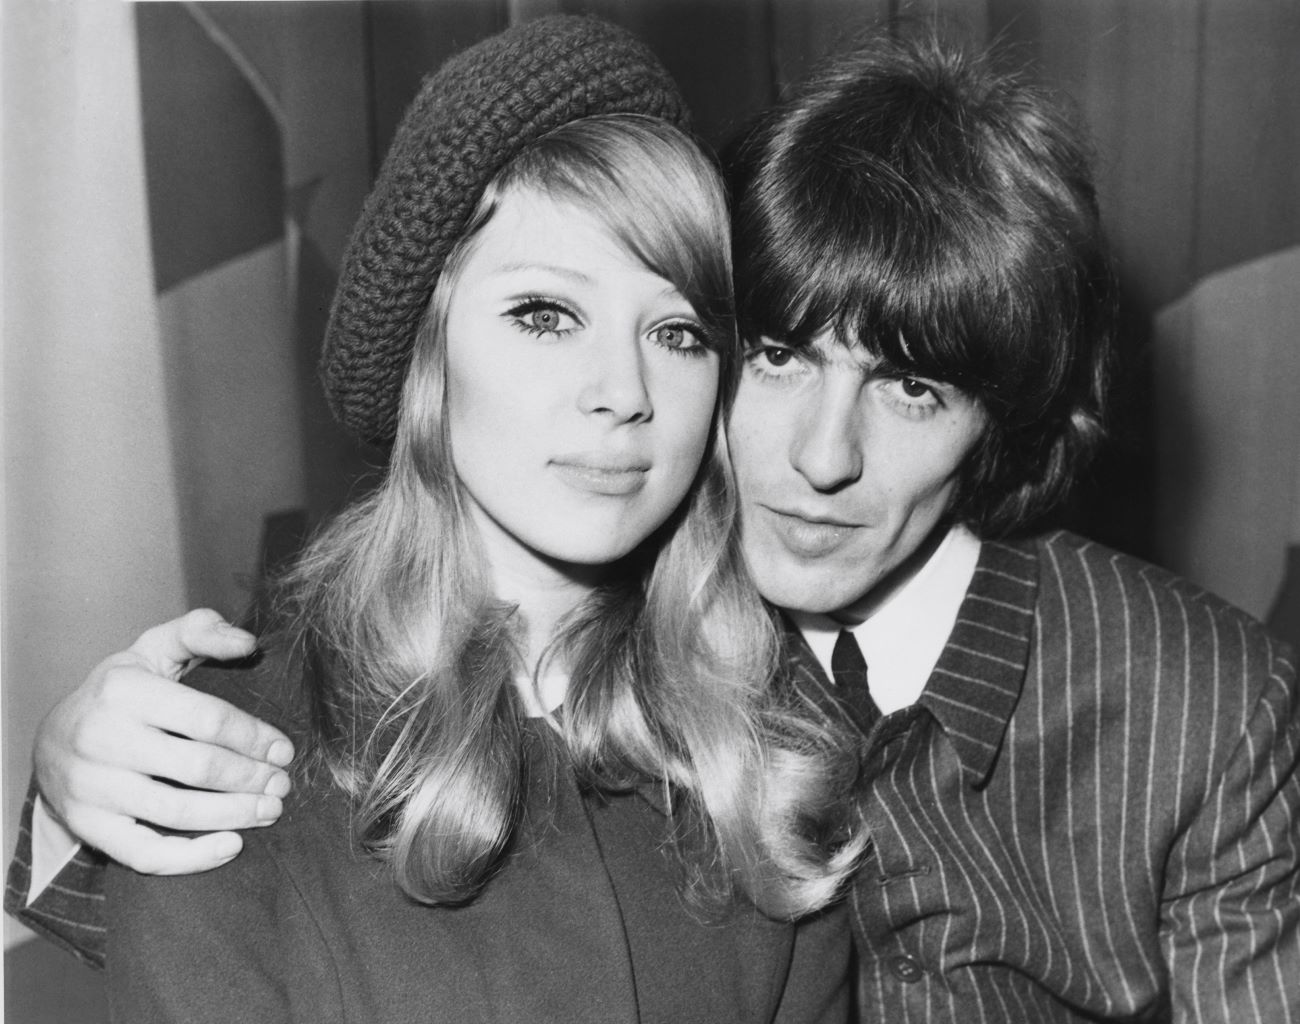 A black and white photo of George Harrison sitting with his arm around Pattie Boyd's shoulders. 